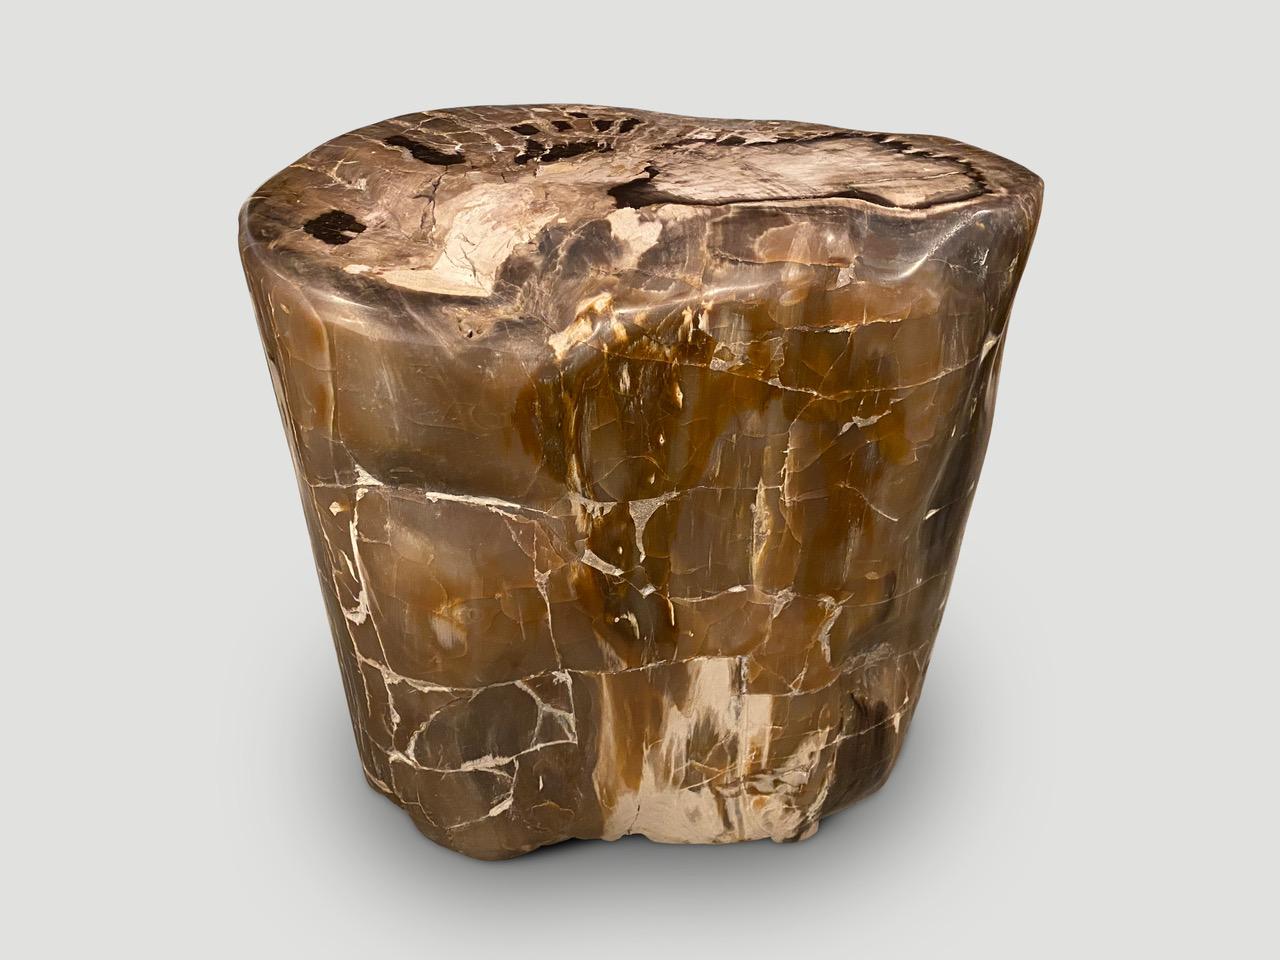 Beautiful contrasting tones and textures on this ancient petrified wood side table. It’s fascinating how Mother Nature produces these exquisite 40 million year old petrified teak logs with such contrasting colors and natural patterns throughout.